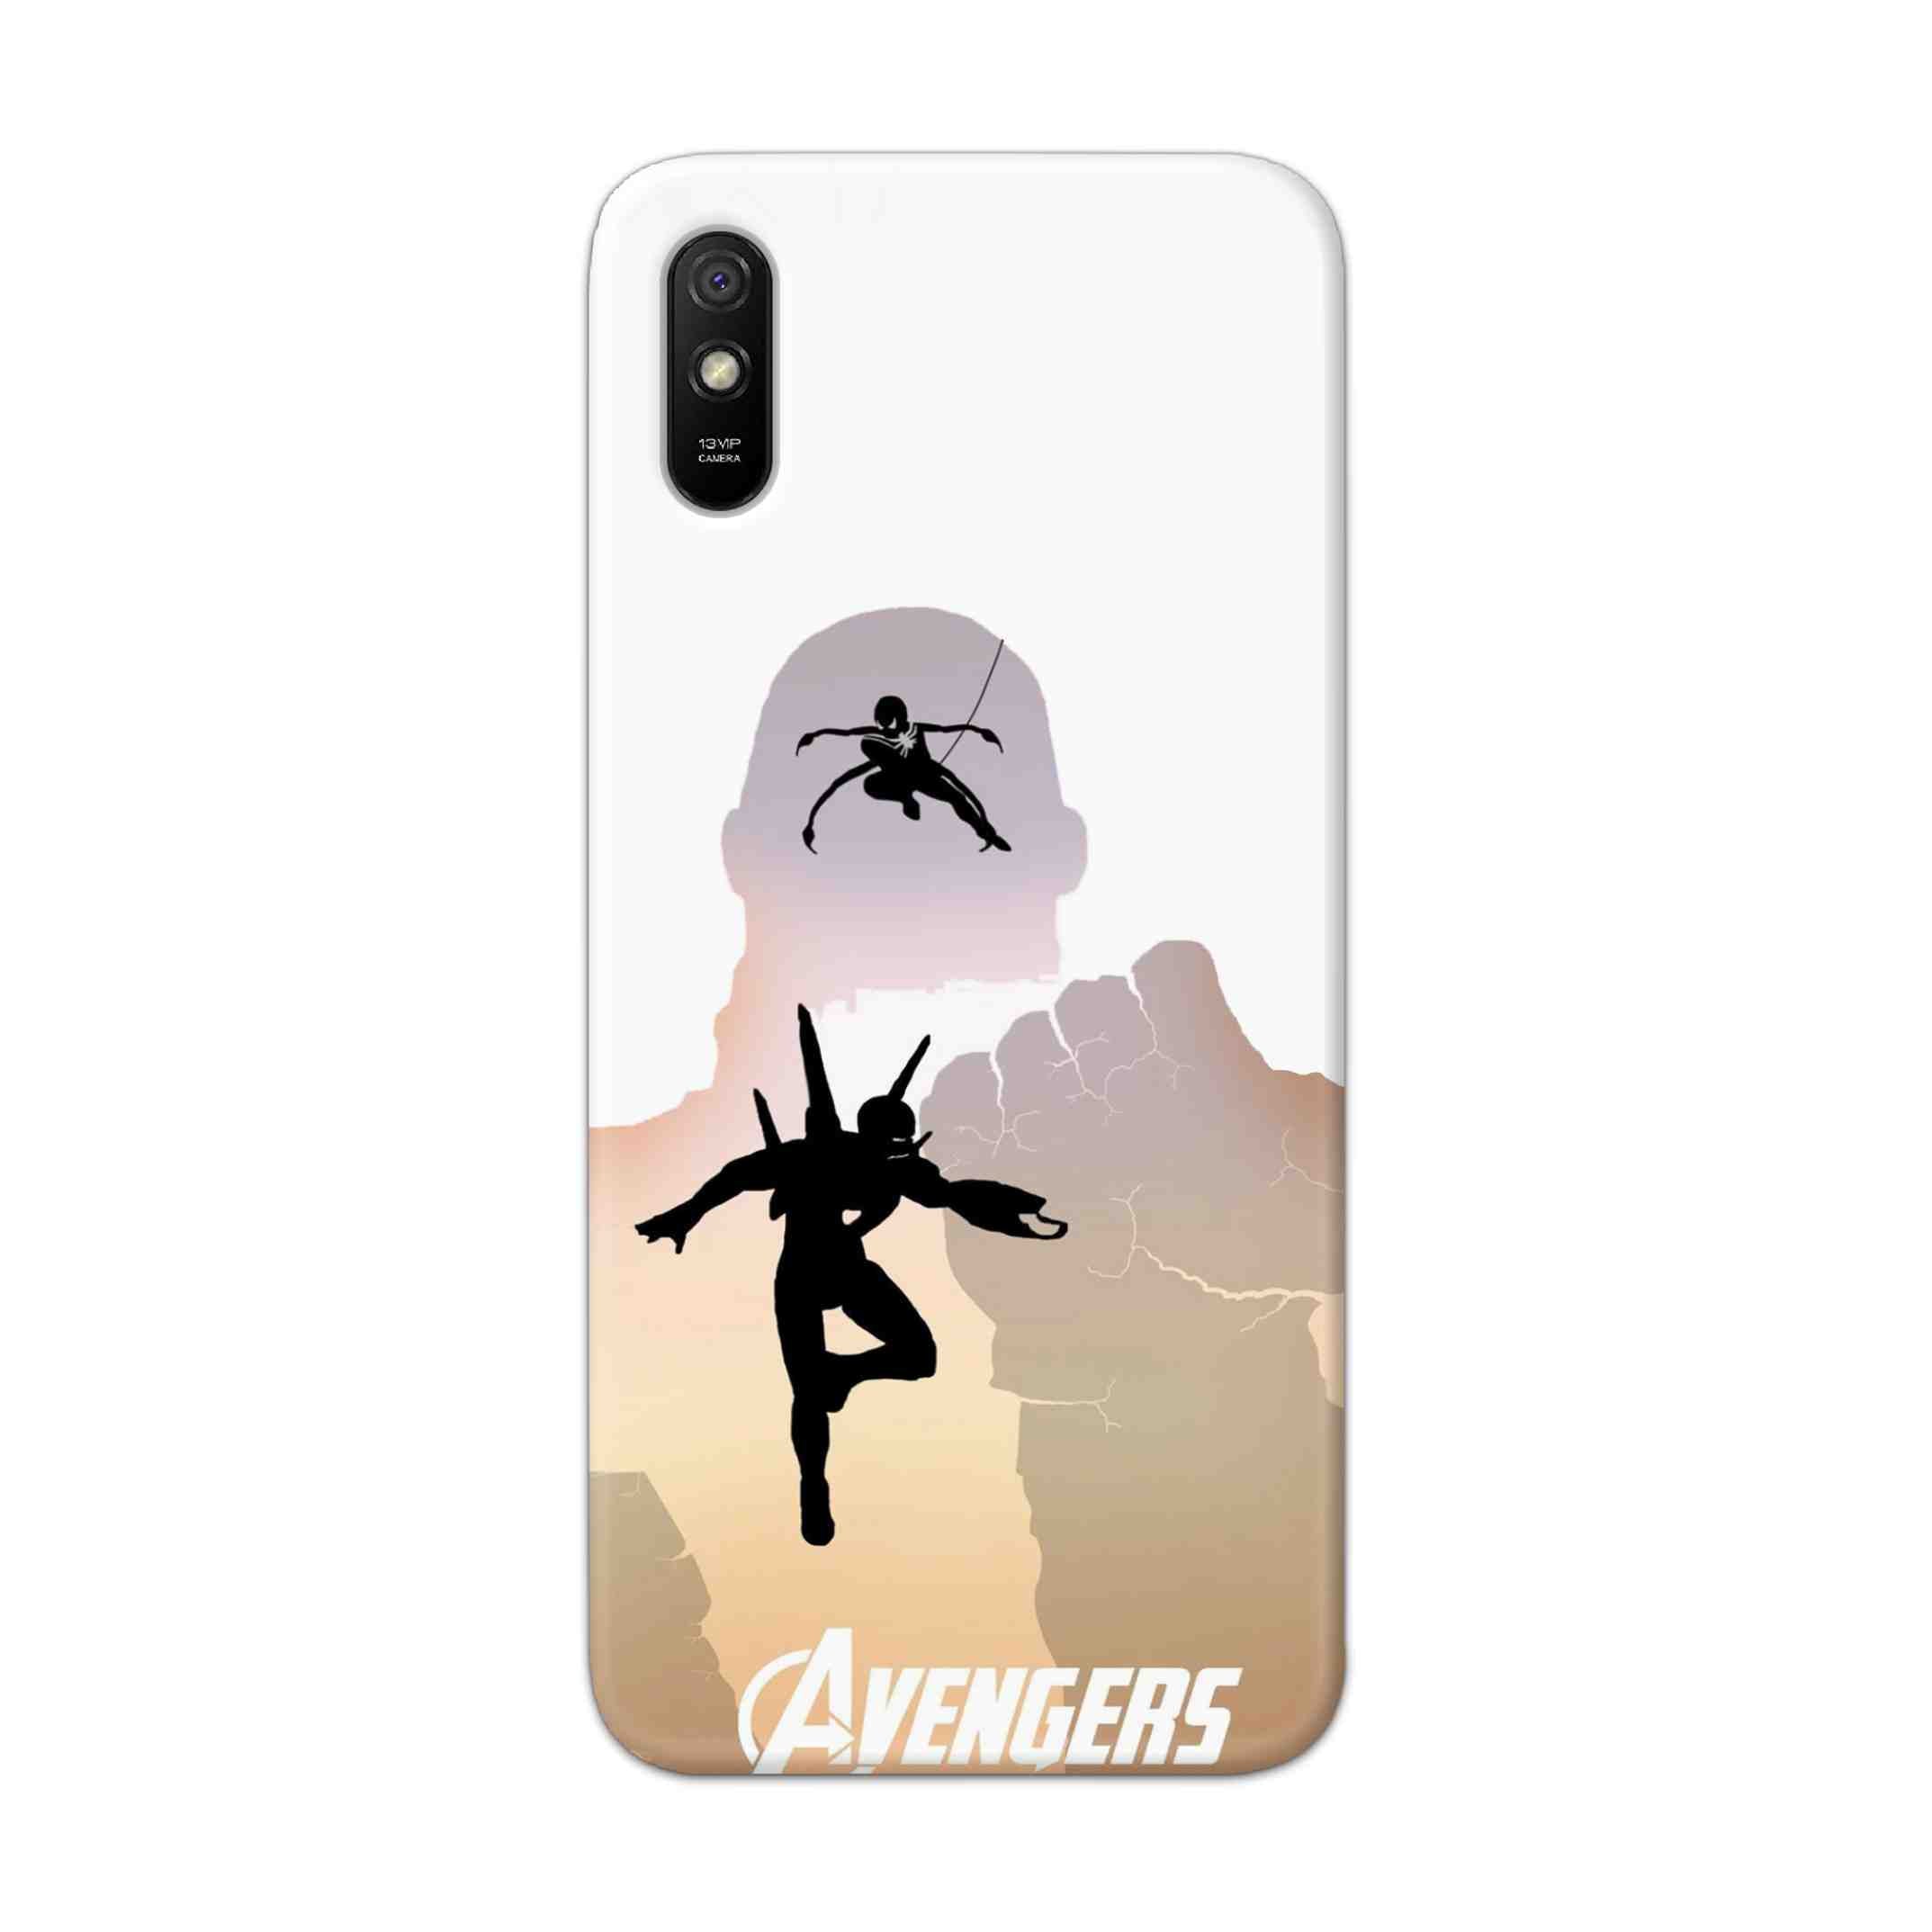 Buy Iron Man Vs Spiderman Hard Back Mobile Phone Case Cover For Redmi 9A Online